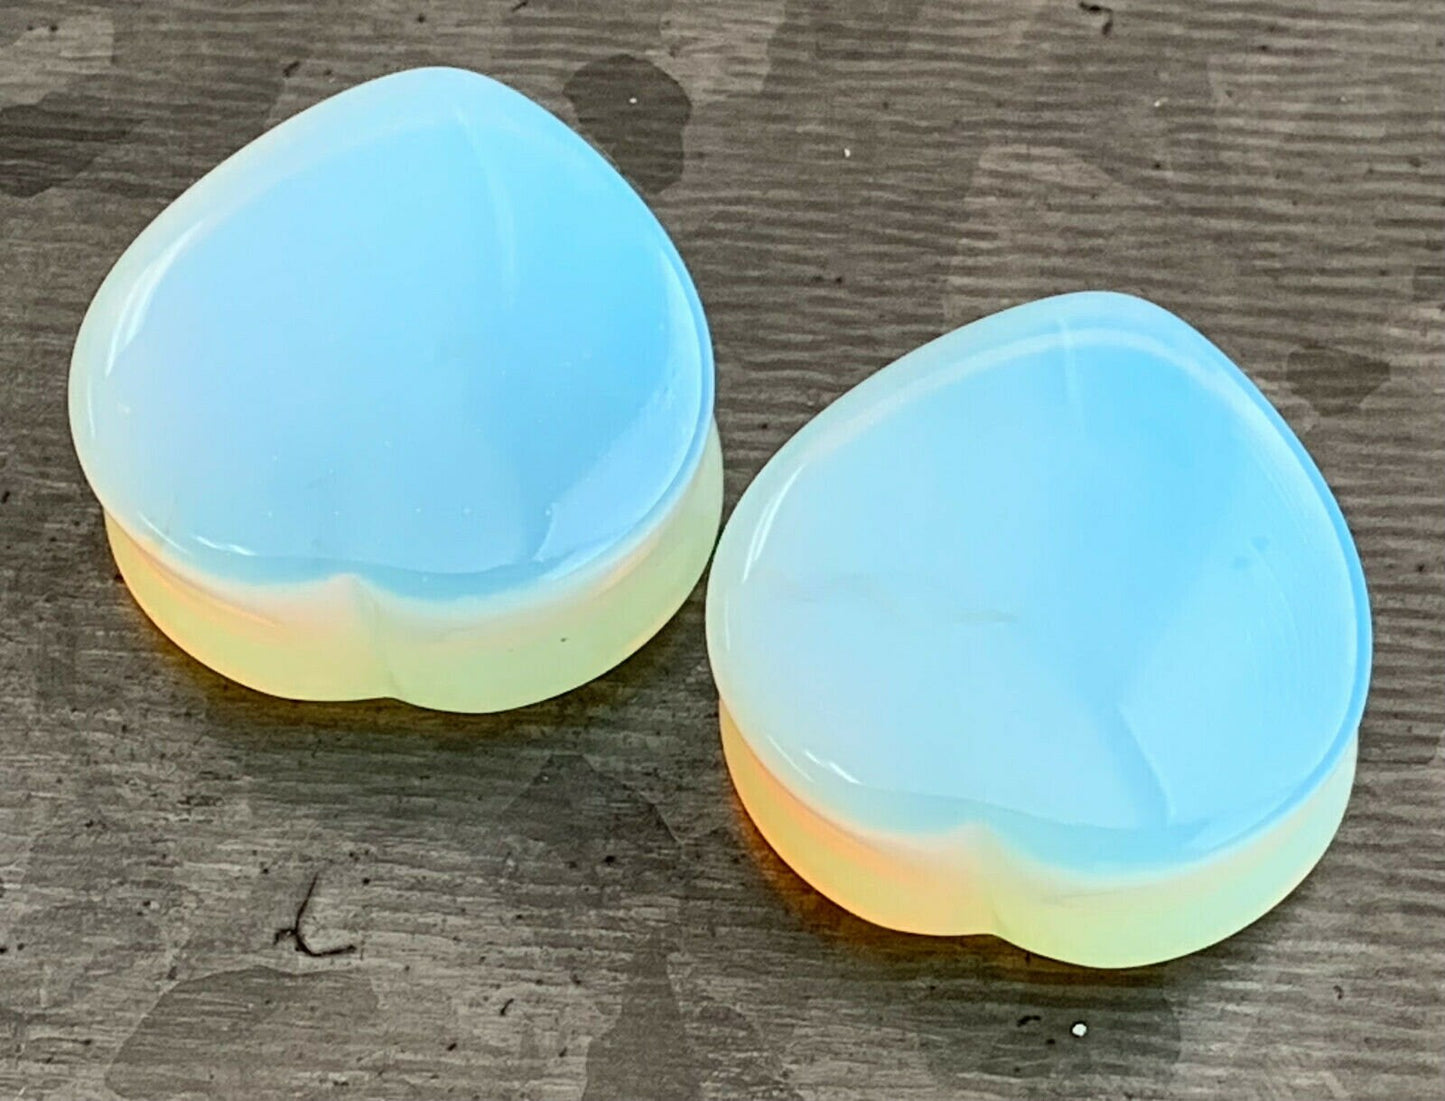 PAIR of Brilliant Opalite Opalescent Heart Double Flare Stone Plugs - Gauges 2g (6mm) thru 1" (25mm) available!